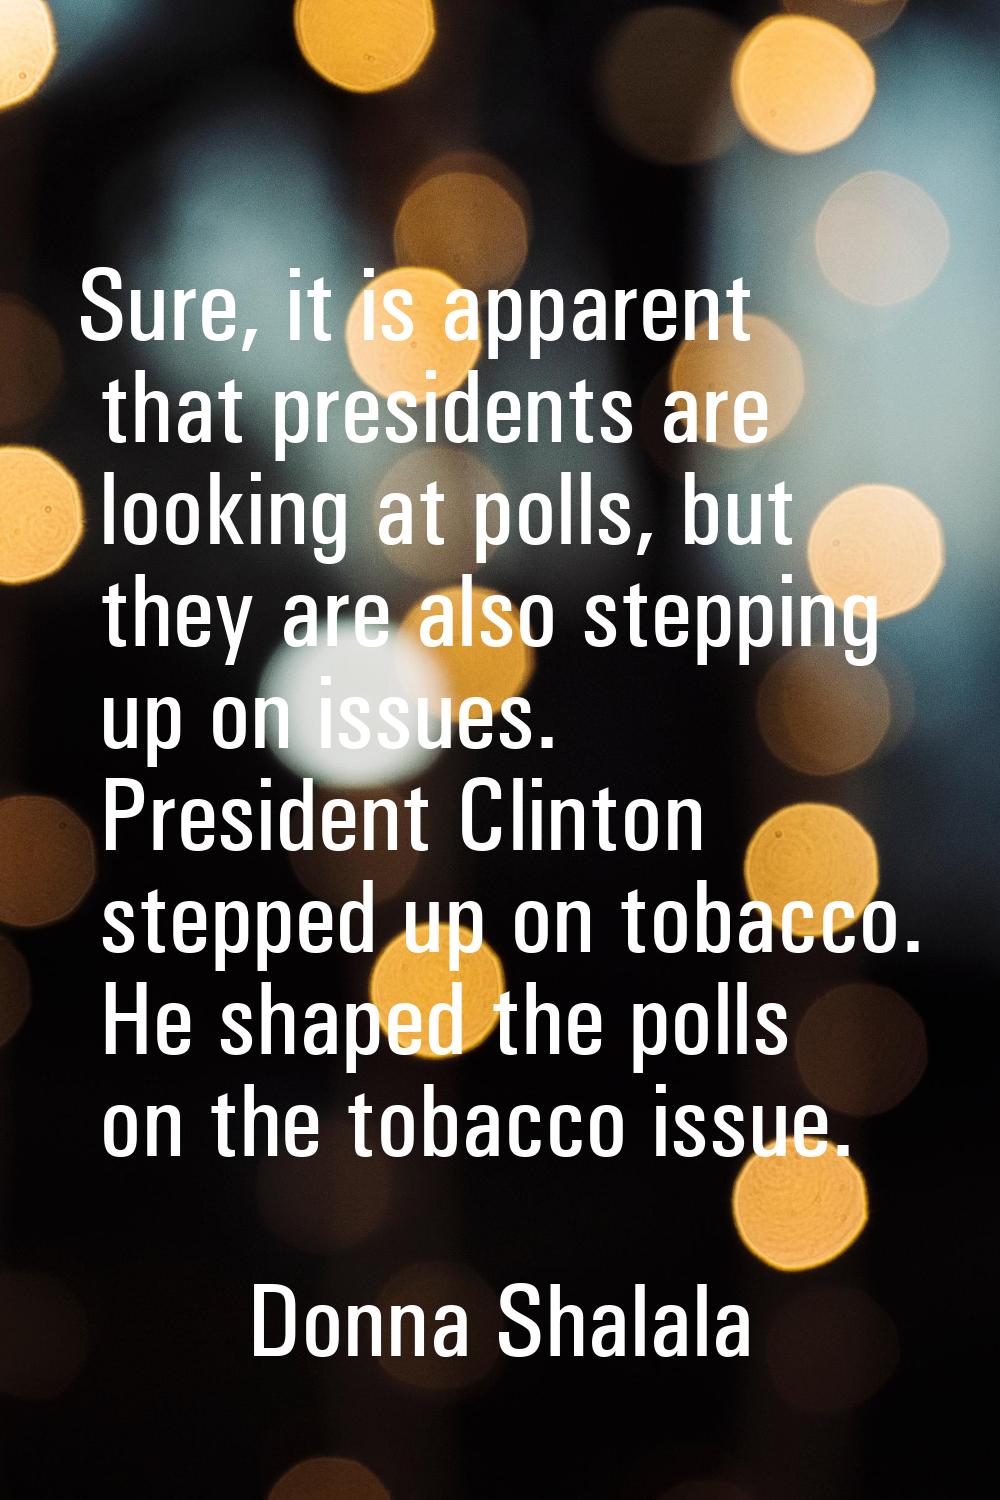 Sure, it is apparent that presidents are looking at polls, but they are also stepping up on issues.